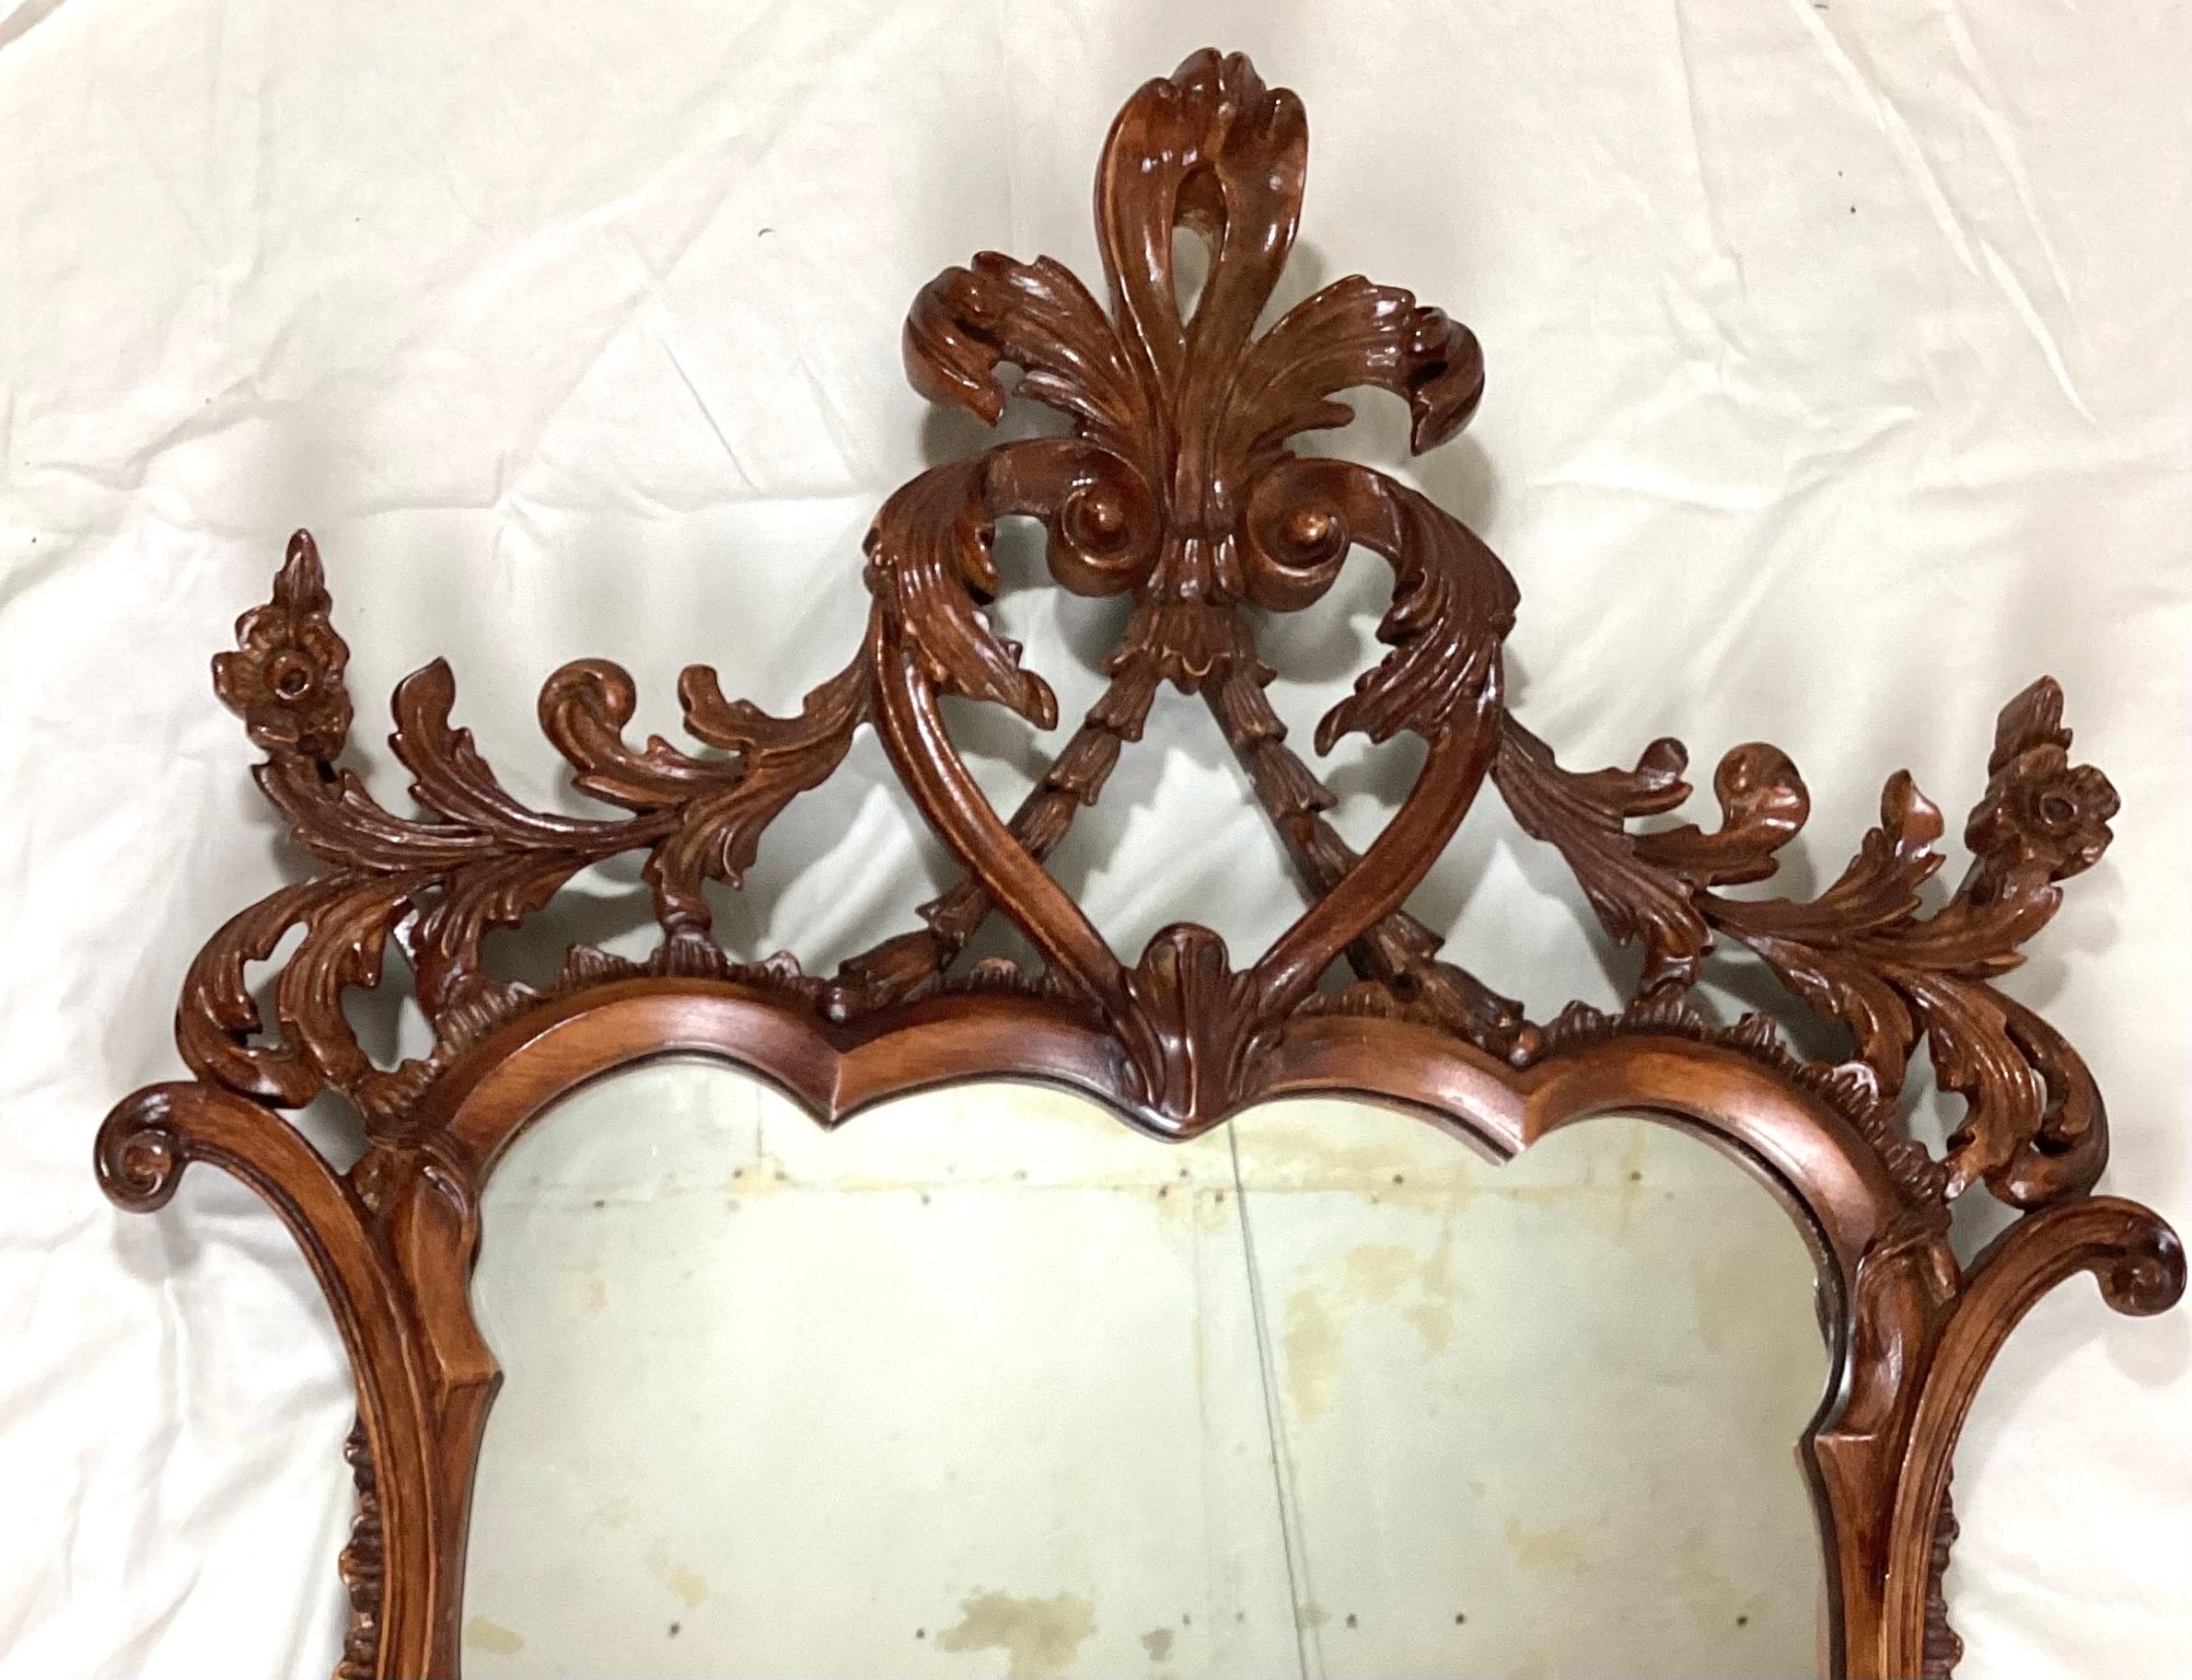 Georgian Rococo wall mirror with a faux wood finish over gesso. 49